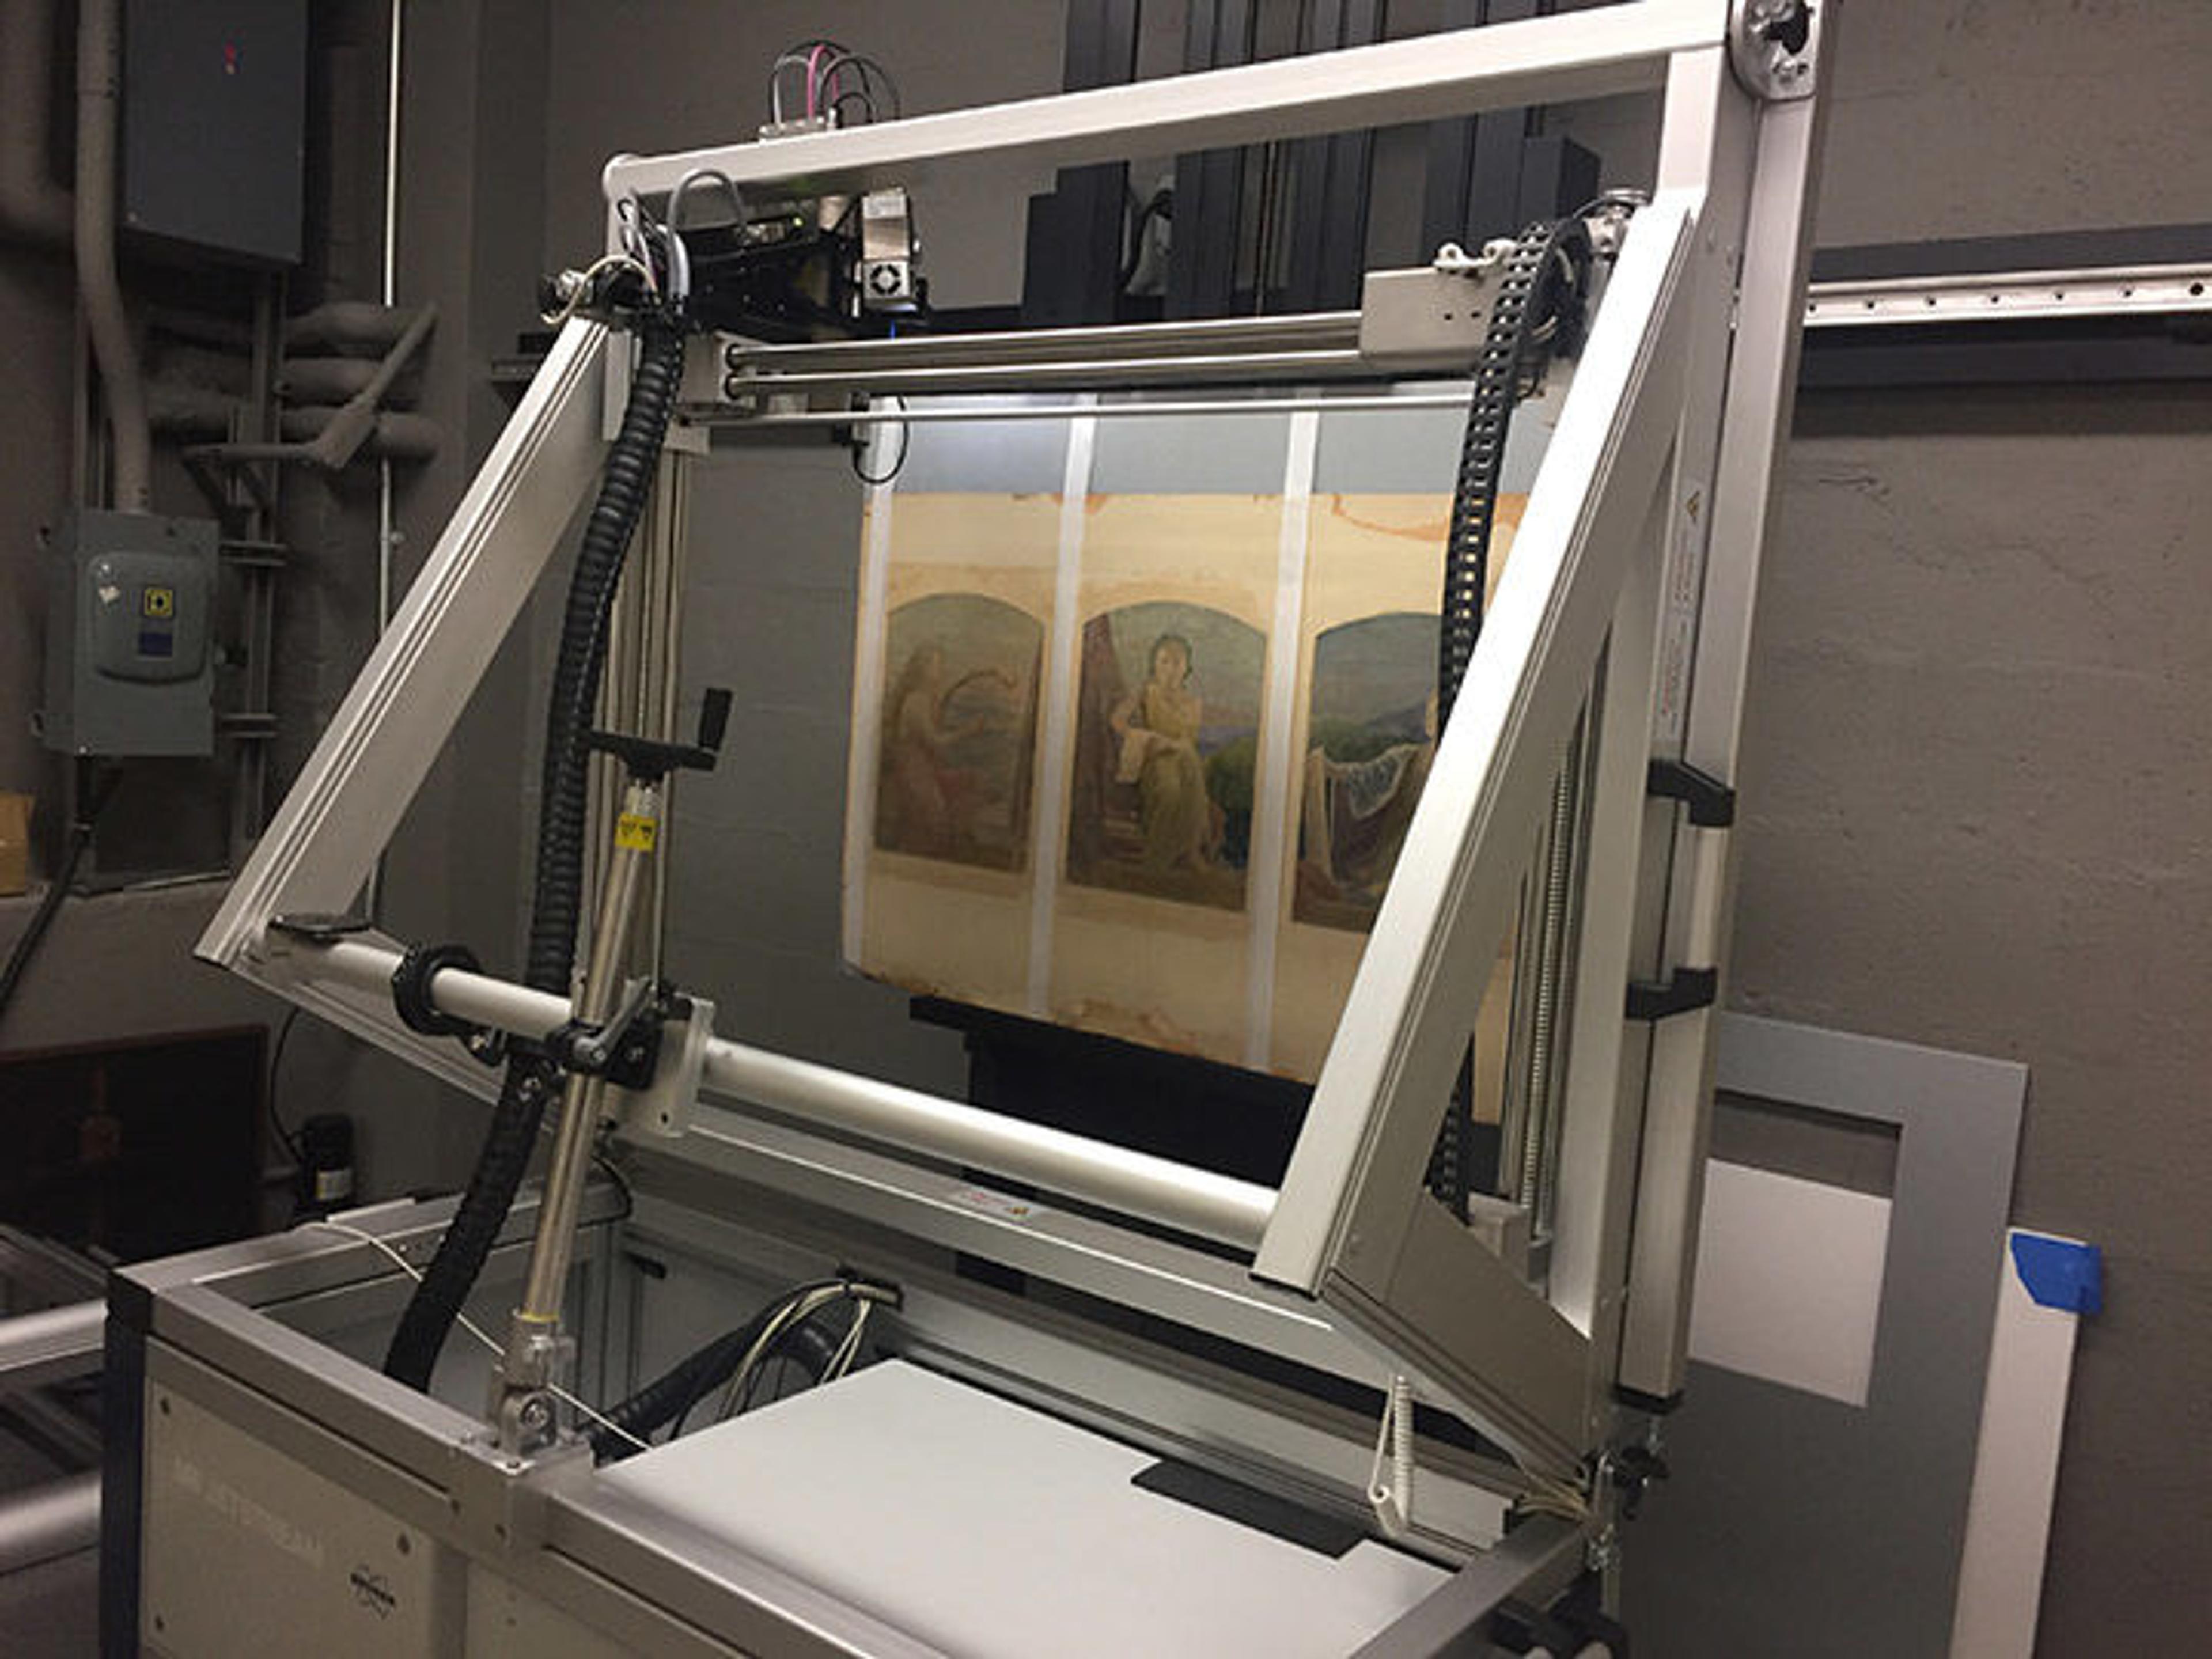 The XRF scanning setup at The Met